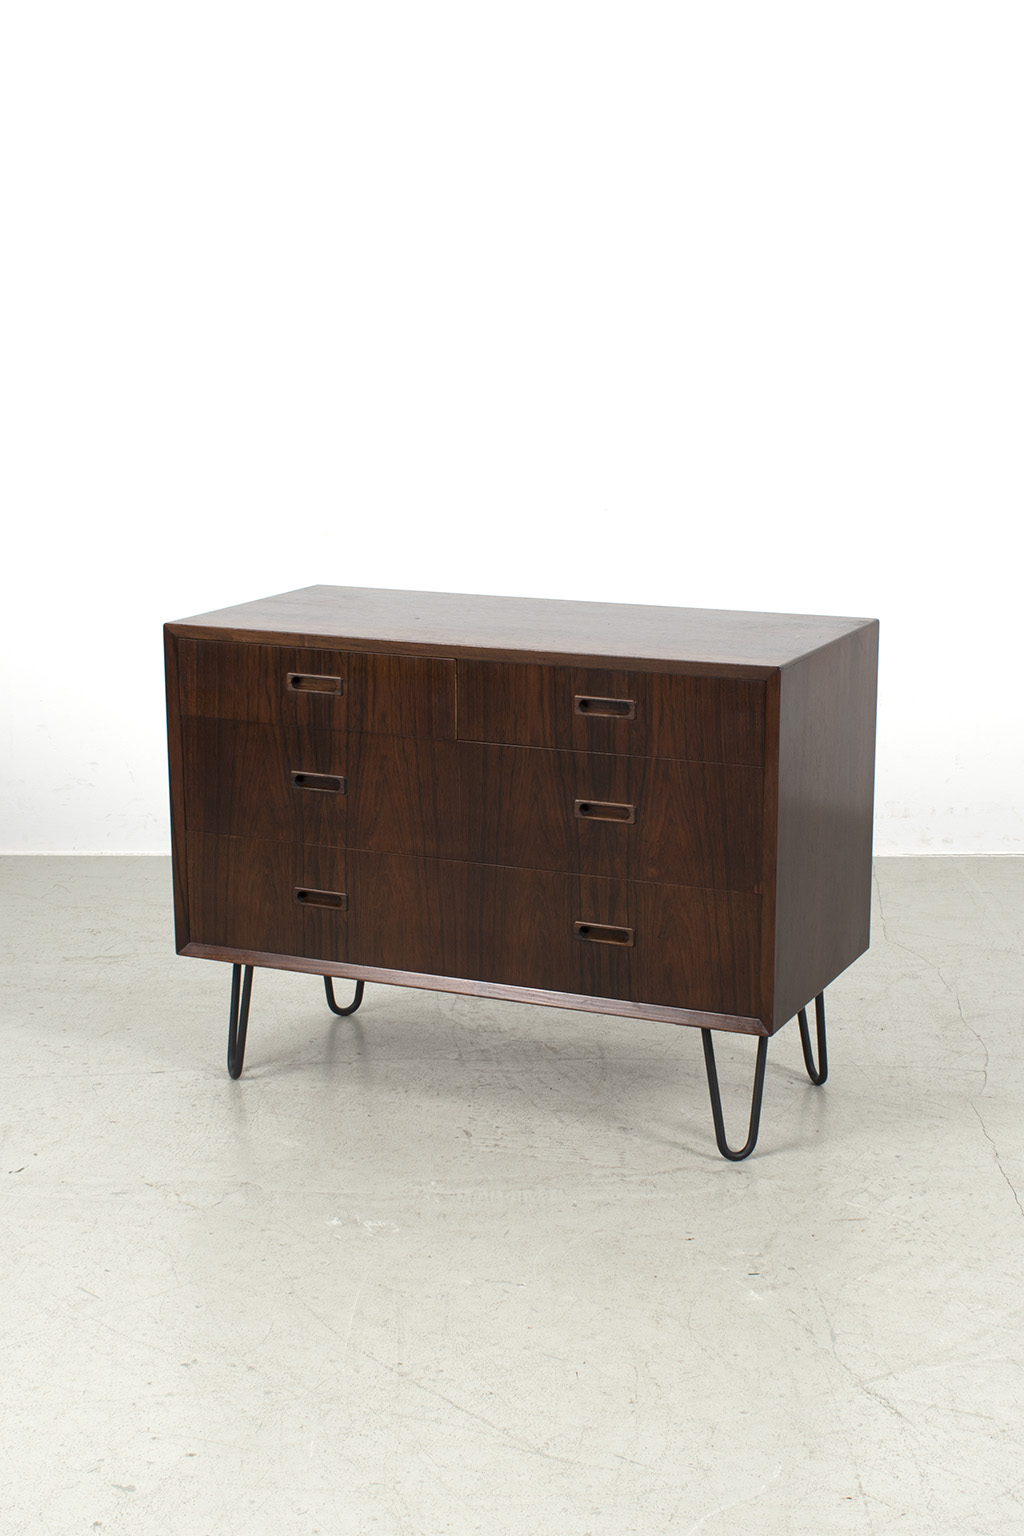 Lyby Møbler rosewood chest of drawers